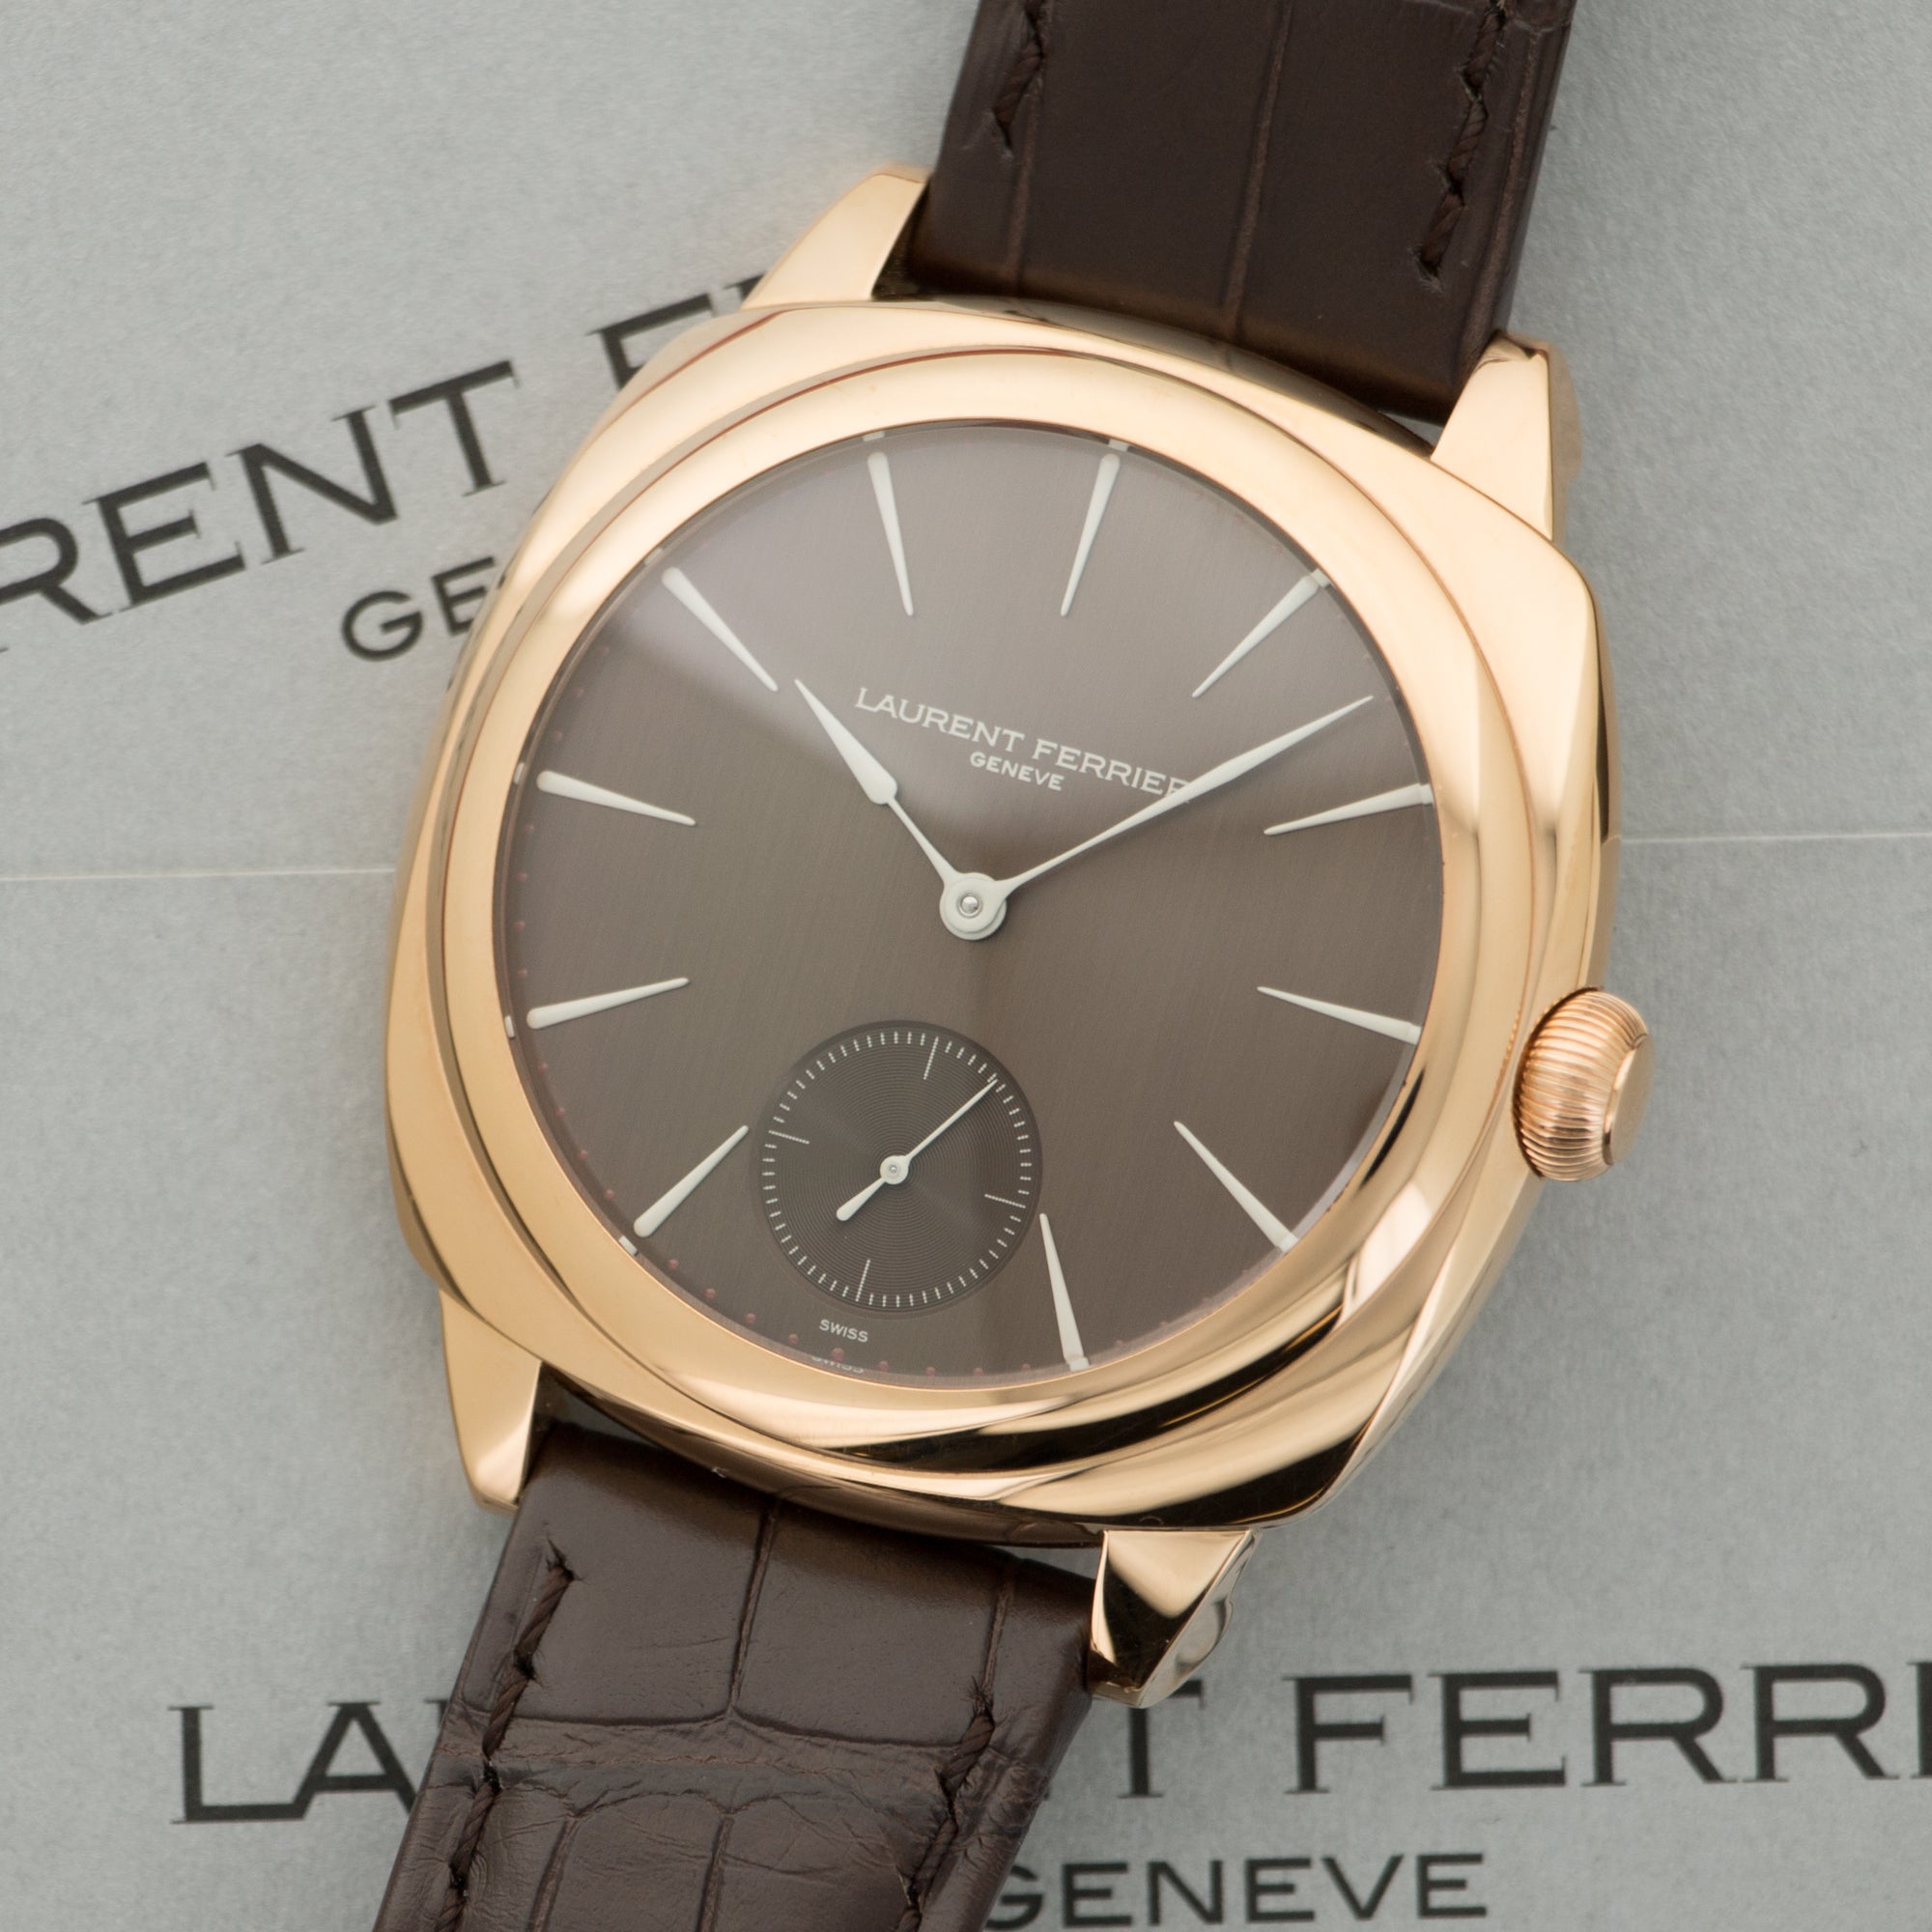 Laurent Ferrier - Laurent Ferrier Rose Gold Galet Square Watch - The Keystone Watches